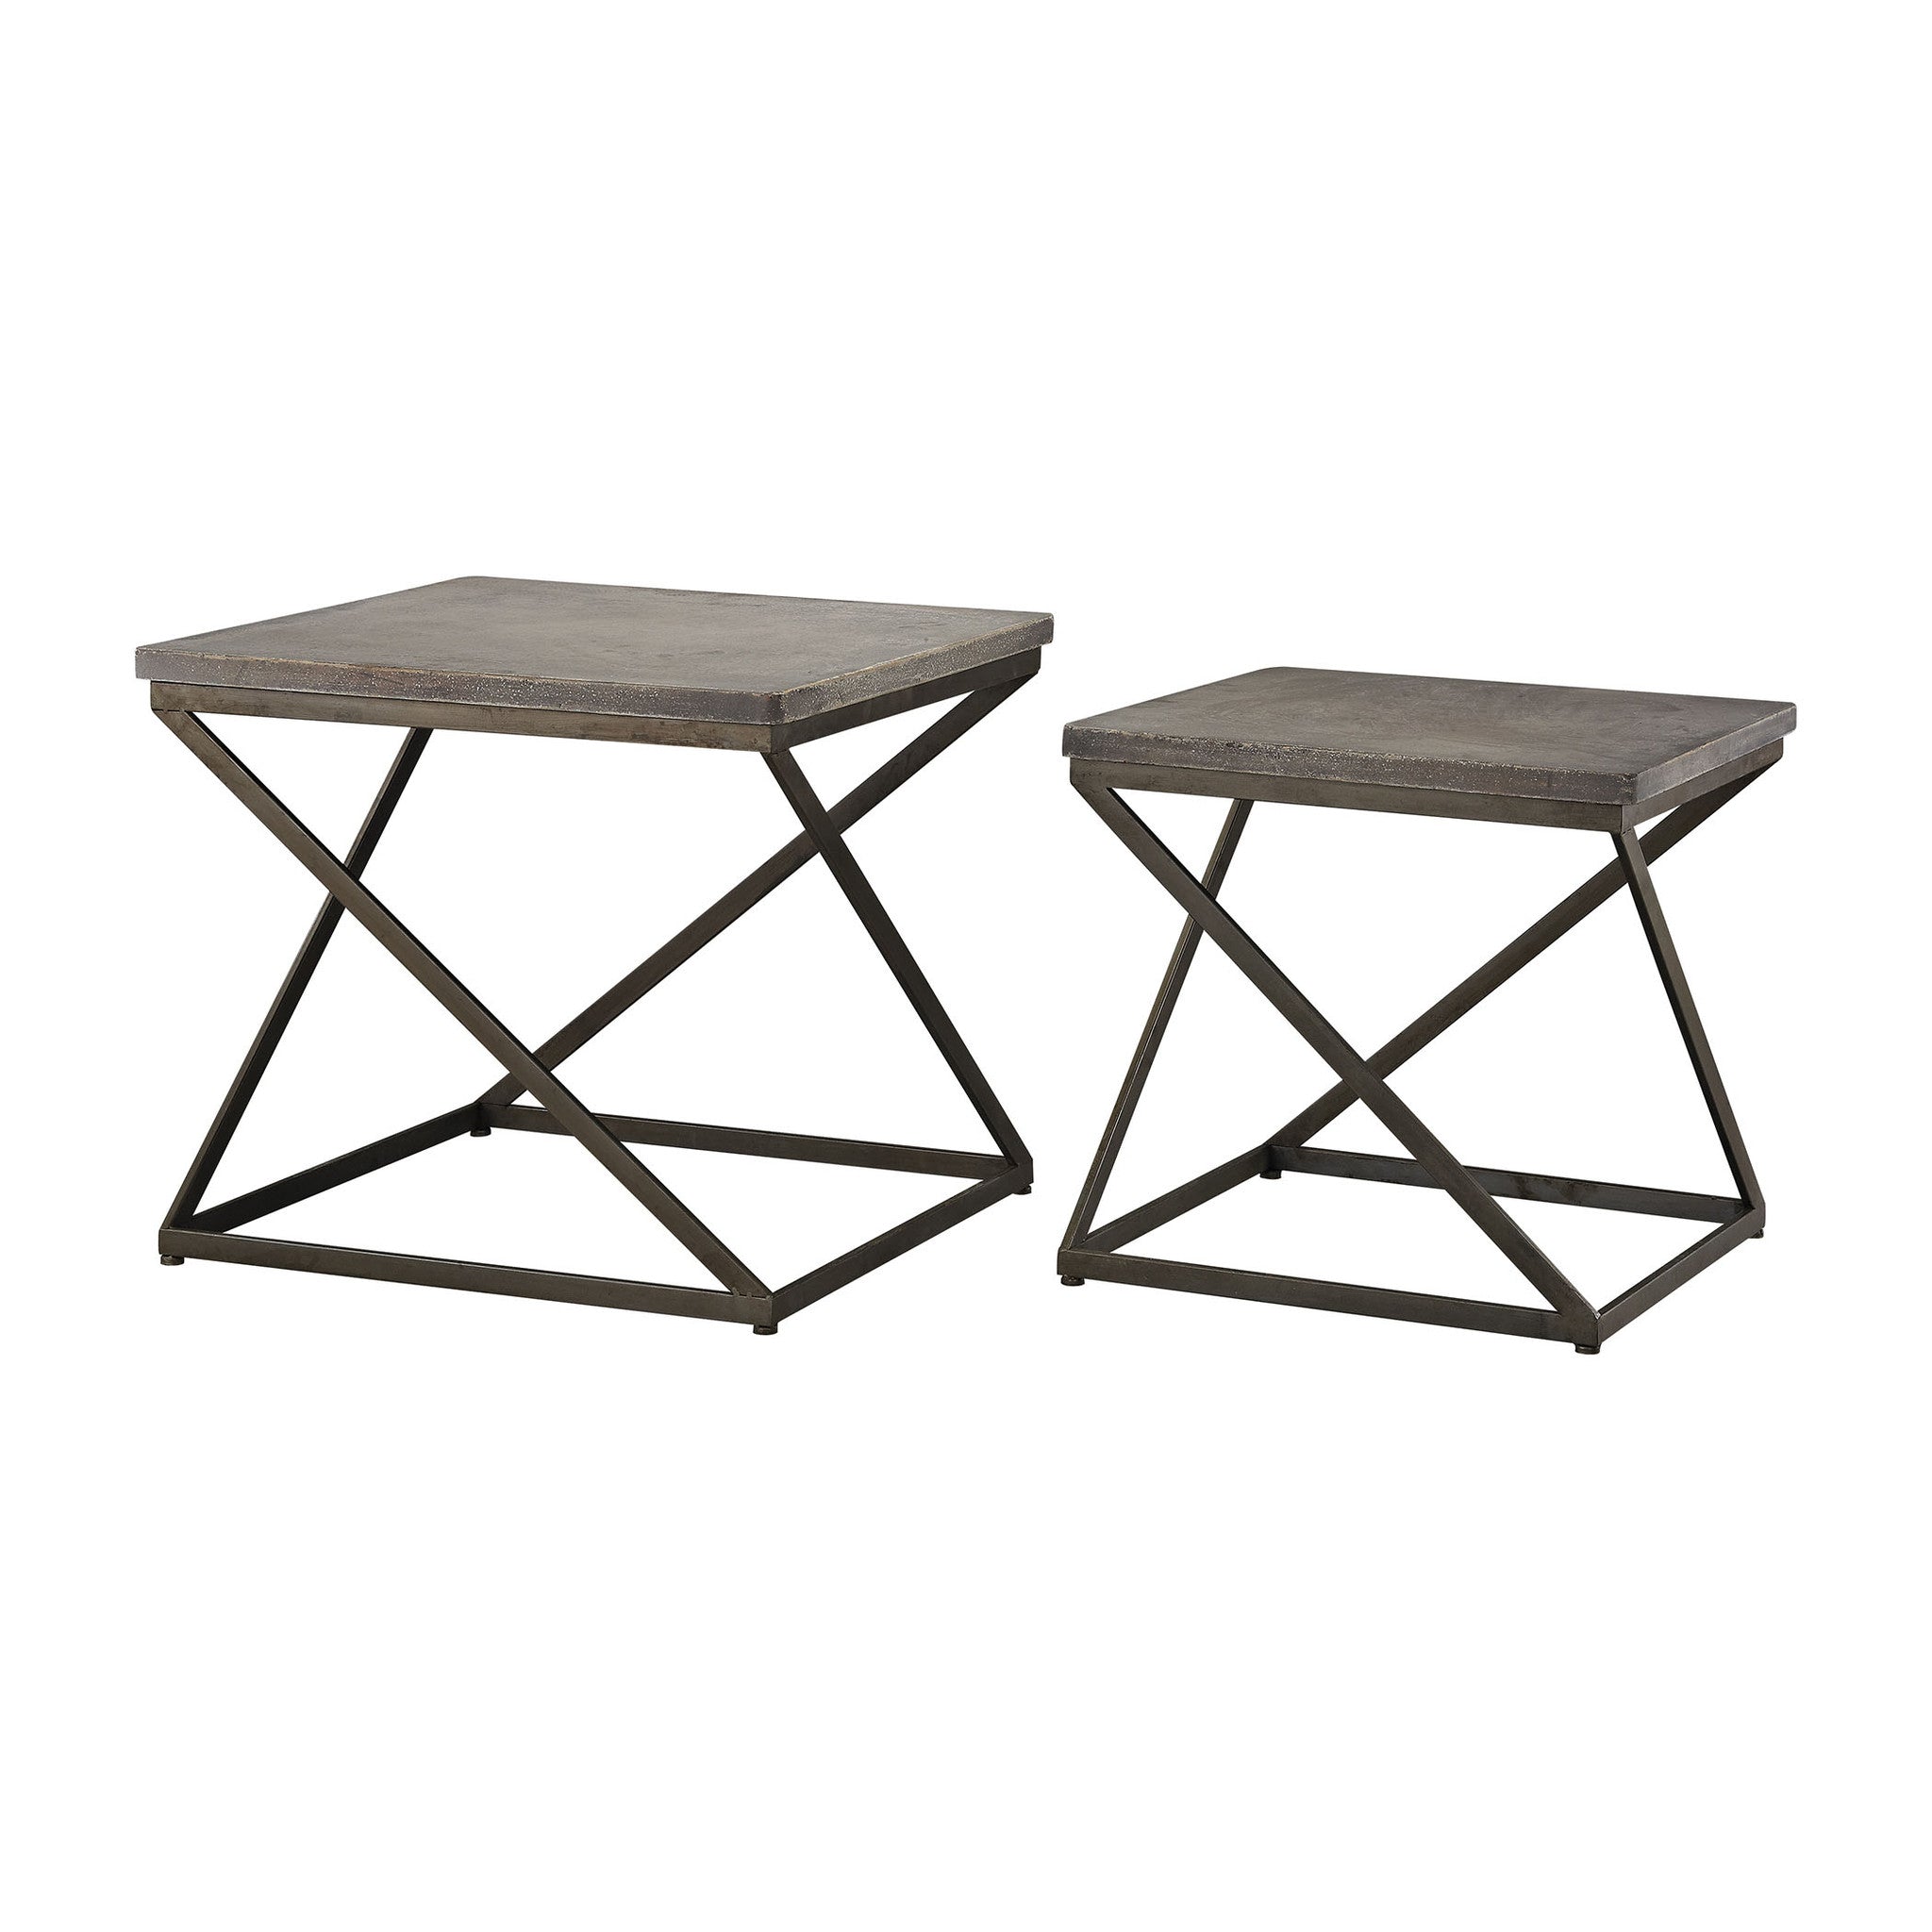 Accent Table - Moya Aged Iron Accent Tables (Set Of 2)